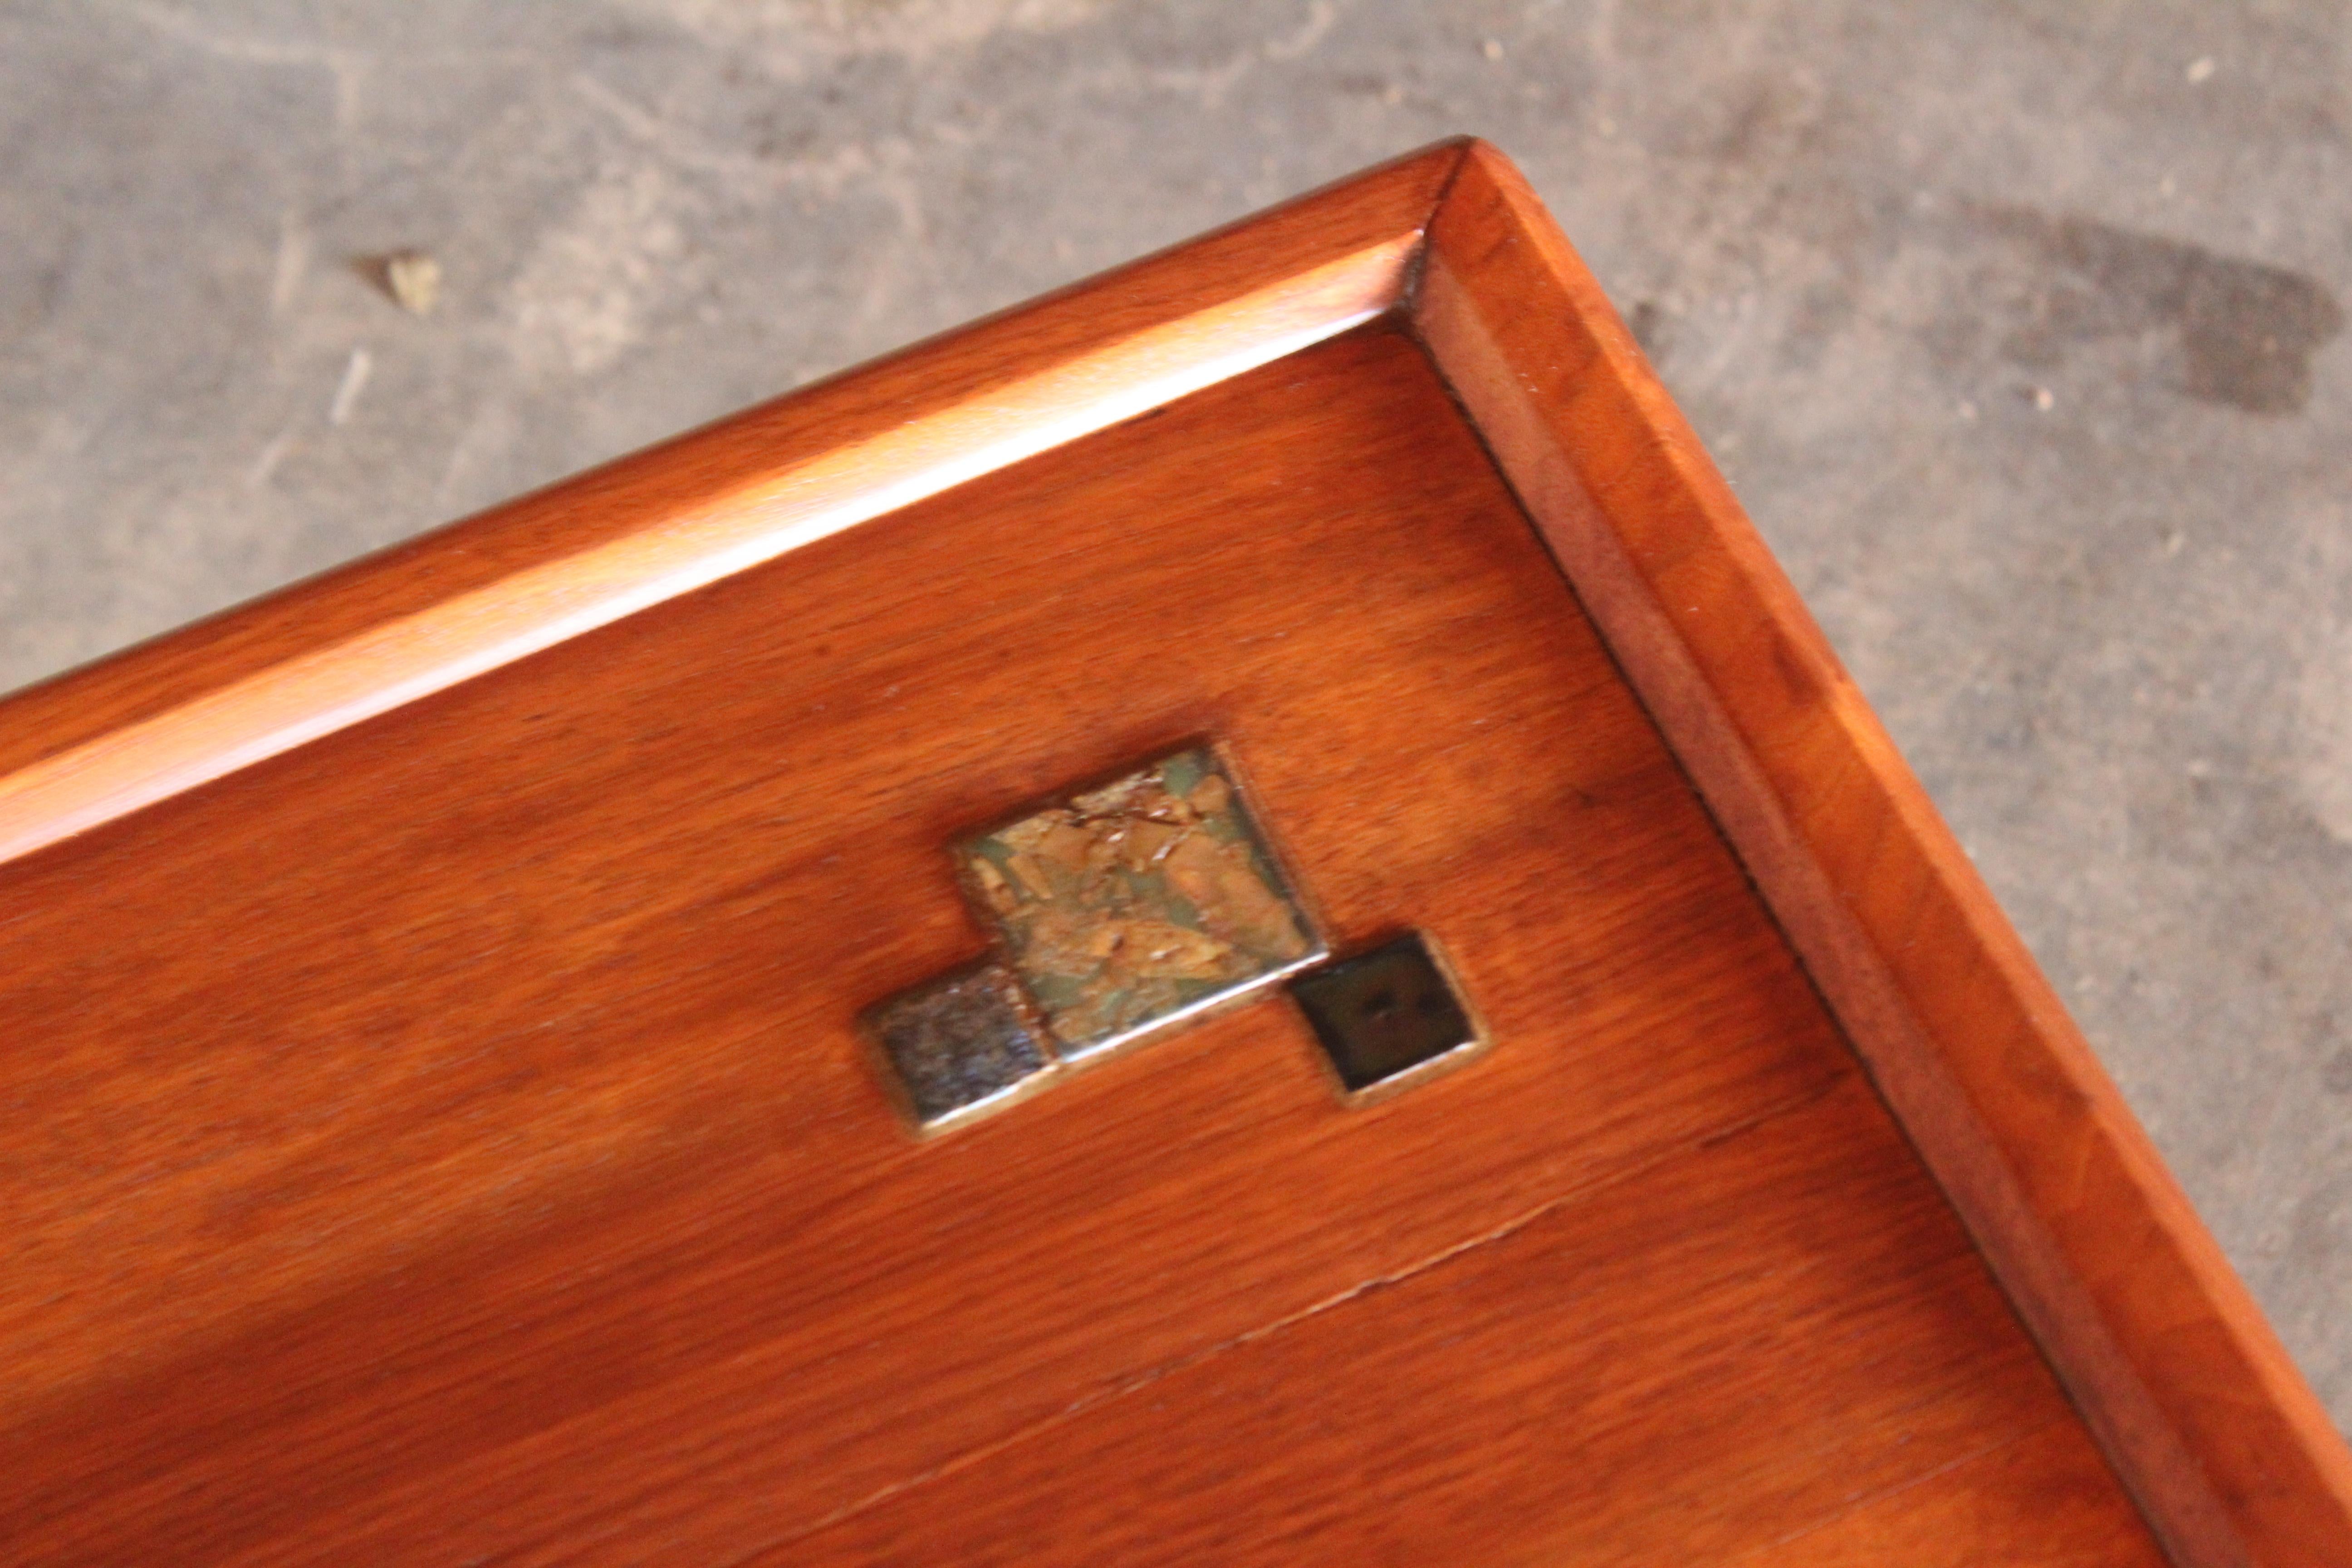 Mid-20th Century Walnut End Table with Tiffany Tiles by Edward Wormley for Dunbar, 1950s For Sale